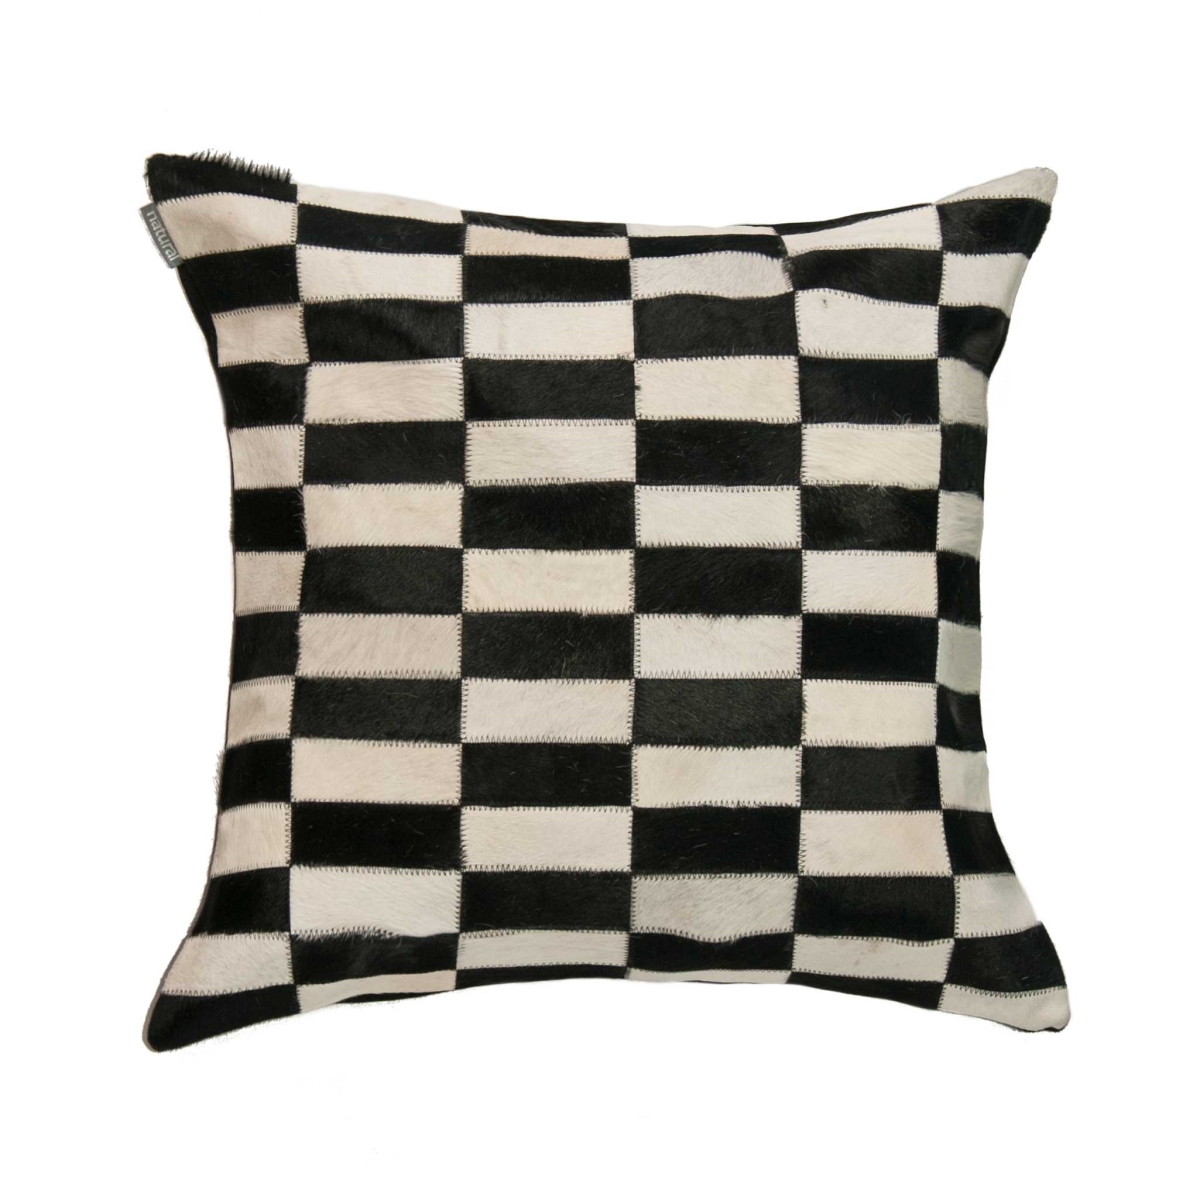 Home Roots Beddings 332302 Torino Classic Large Linear Cowhide Pillow, Black & White - 22 X 22 In.